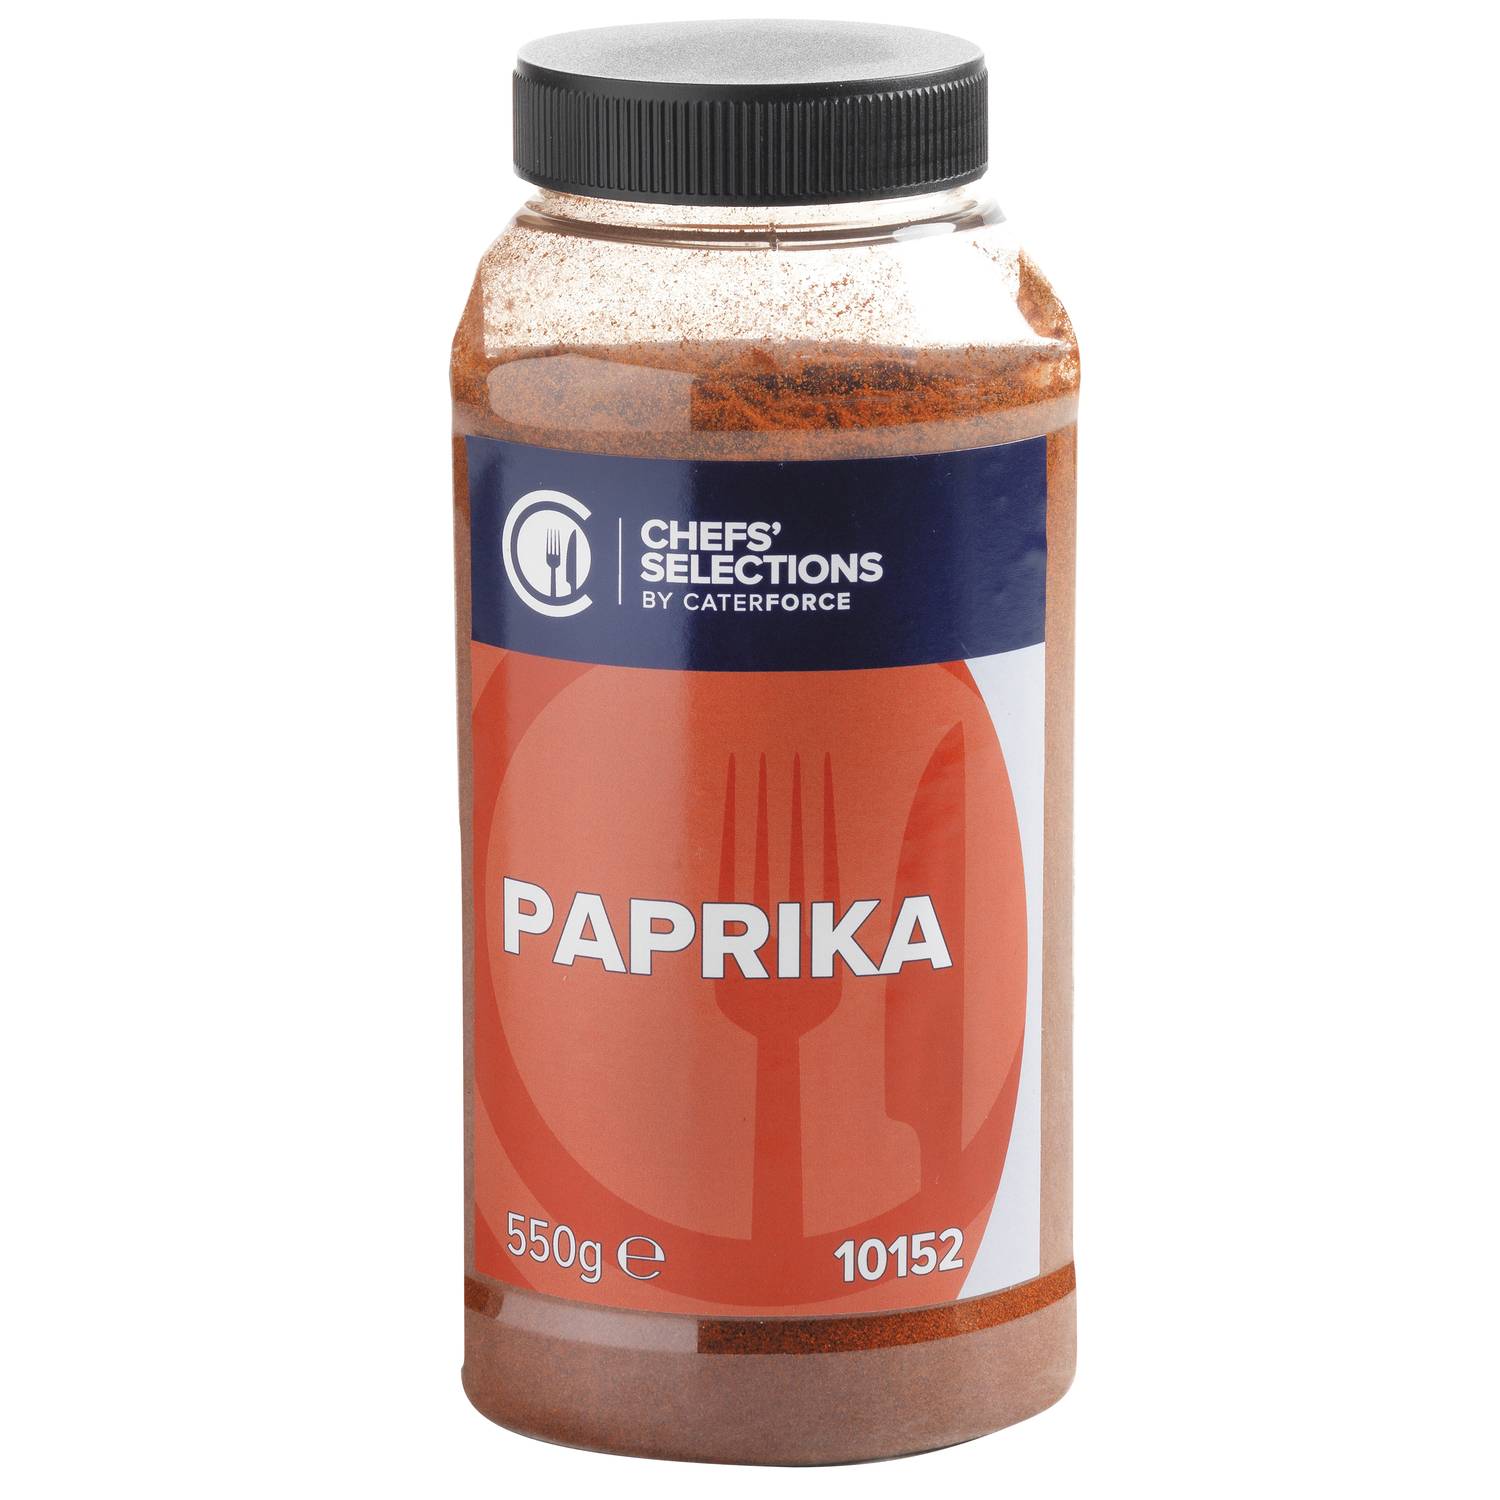 Chefs’ Selections Paprika (6 x 550g)